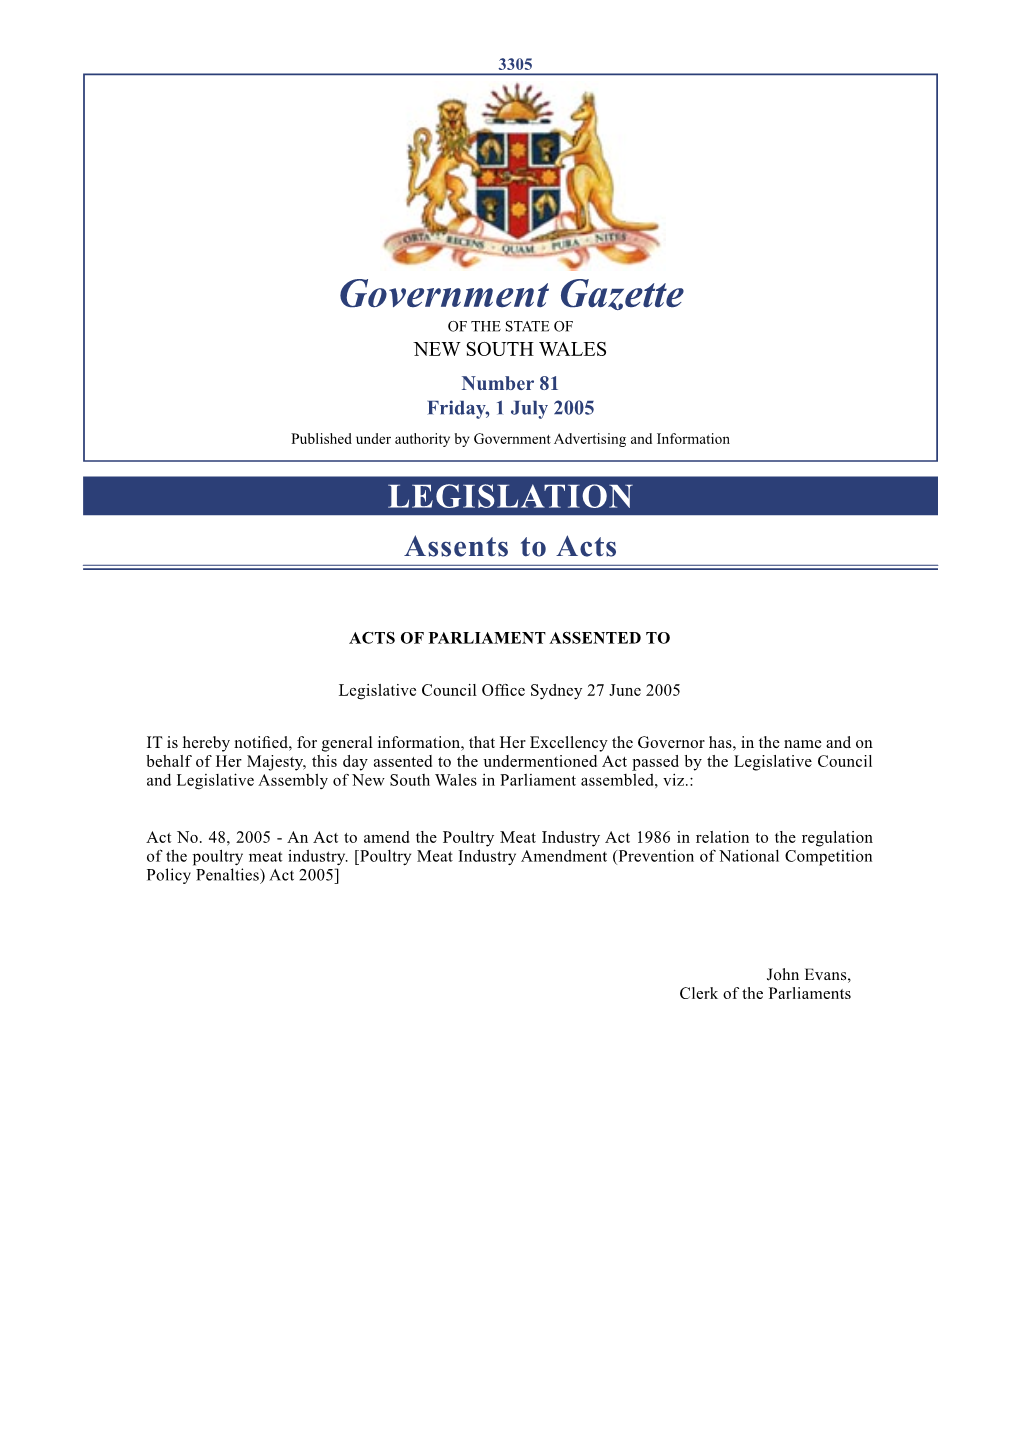 Government Gazette of the STATE of NEW SOUTH WALES Number 81 Friday, 1 July 2005 Published Under Authority by Government Advertising and Information